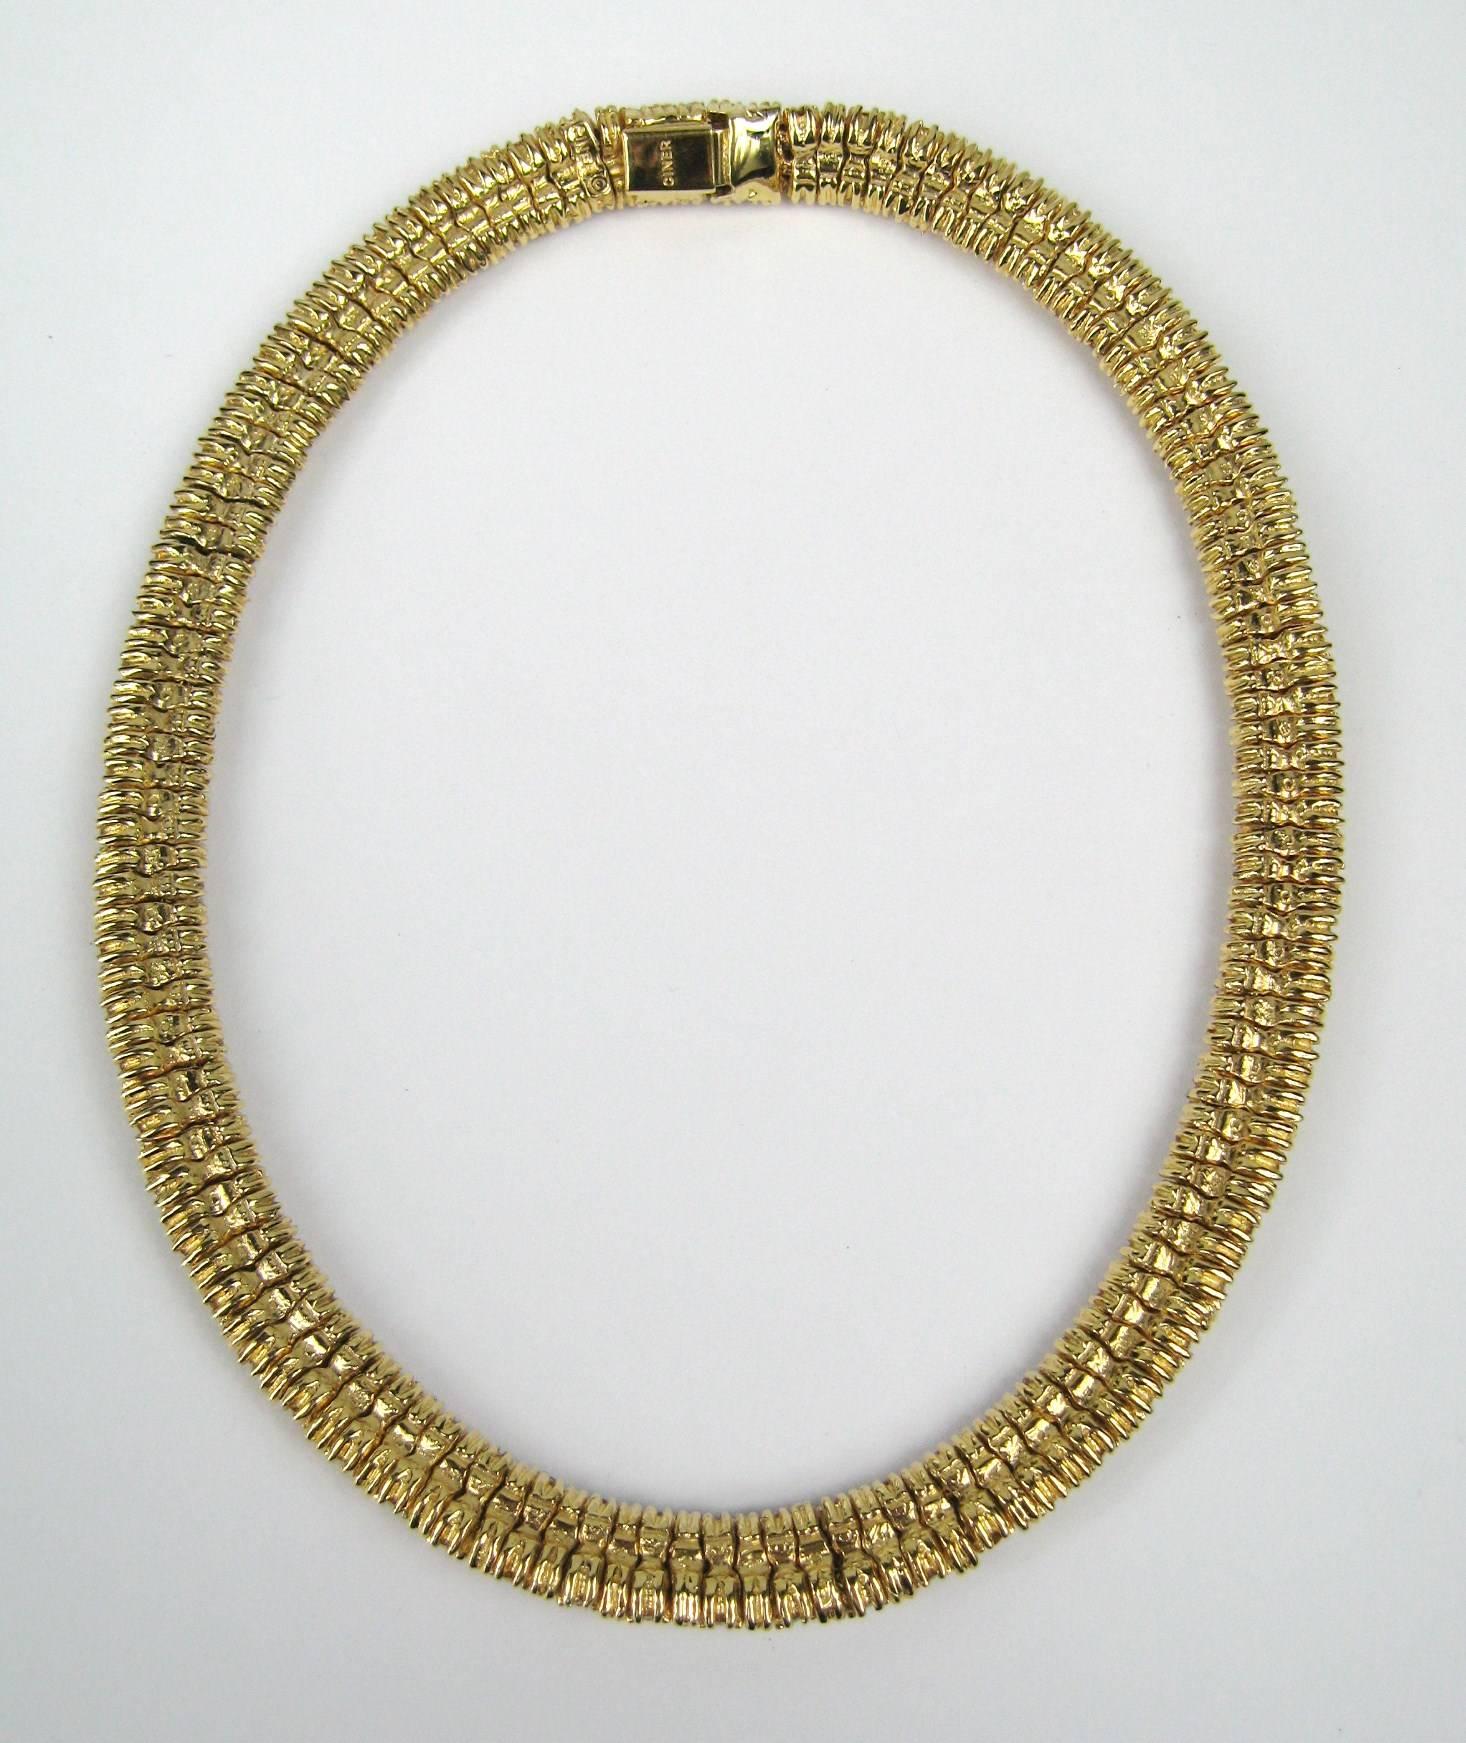  Ciner swarovski Crystal Choker Necklace Gold tone New, Never Worn 1980s In New Condition For Sale In Wallkill, NY